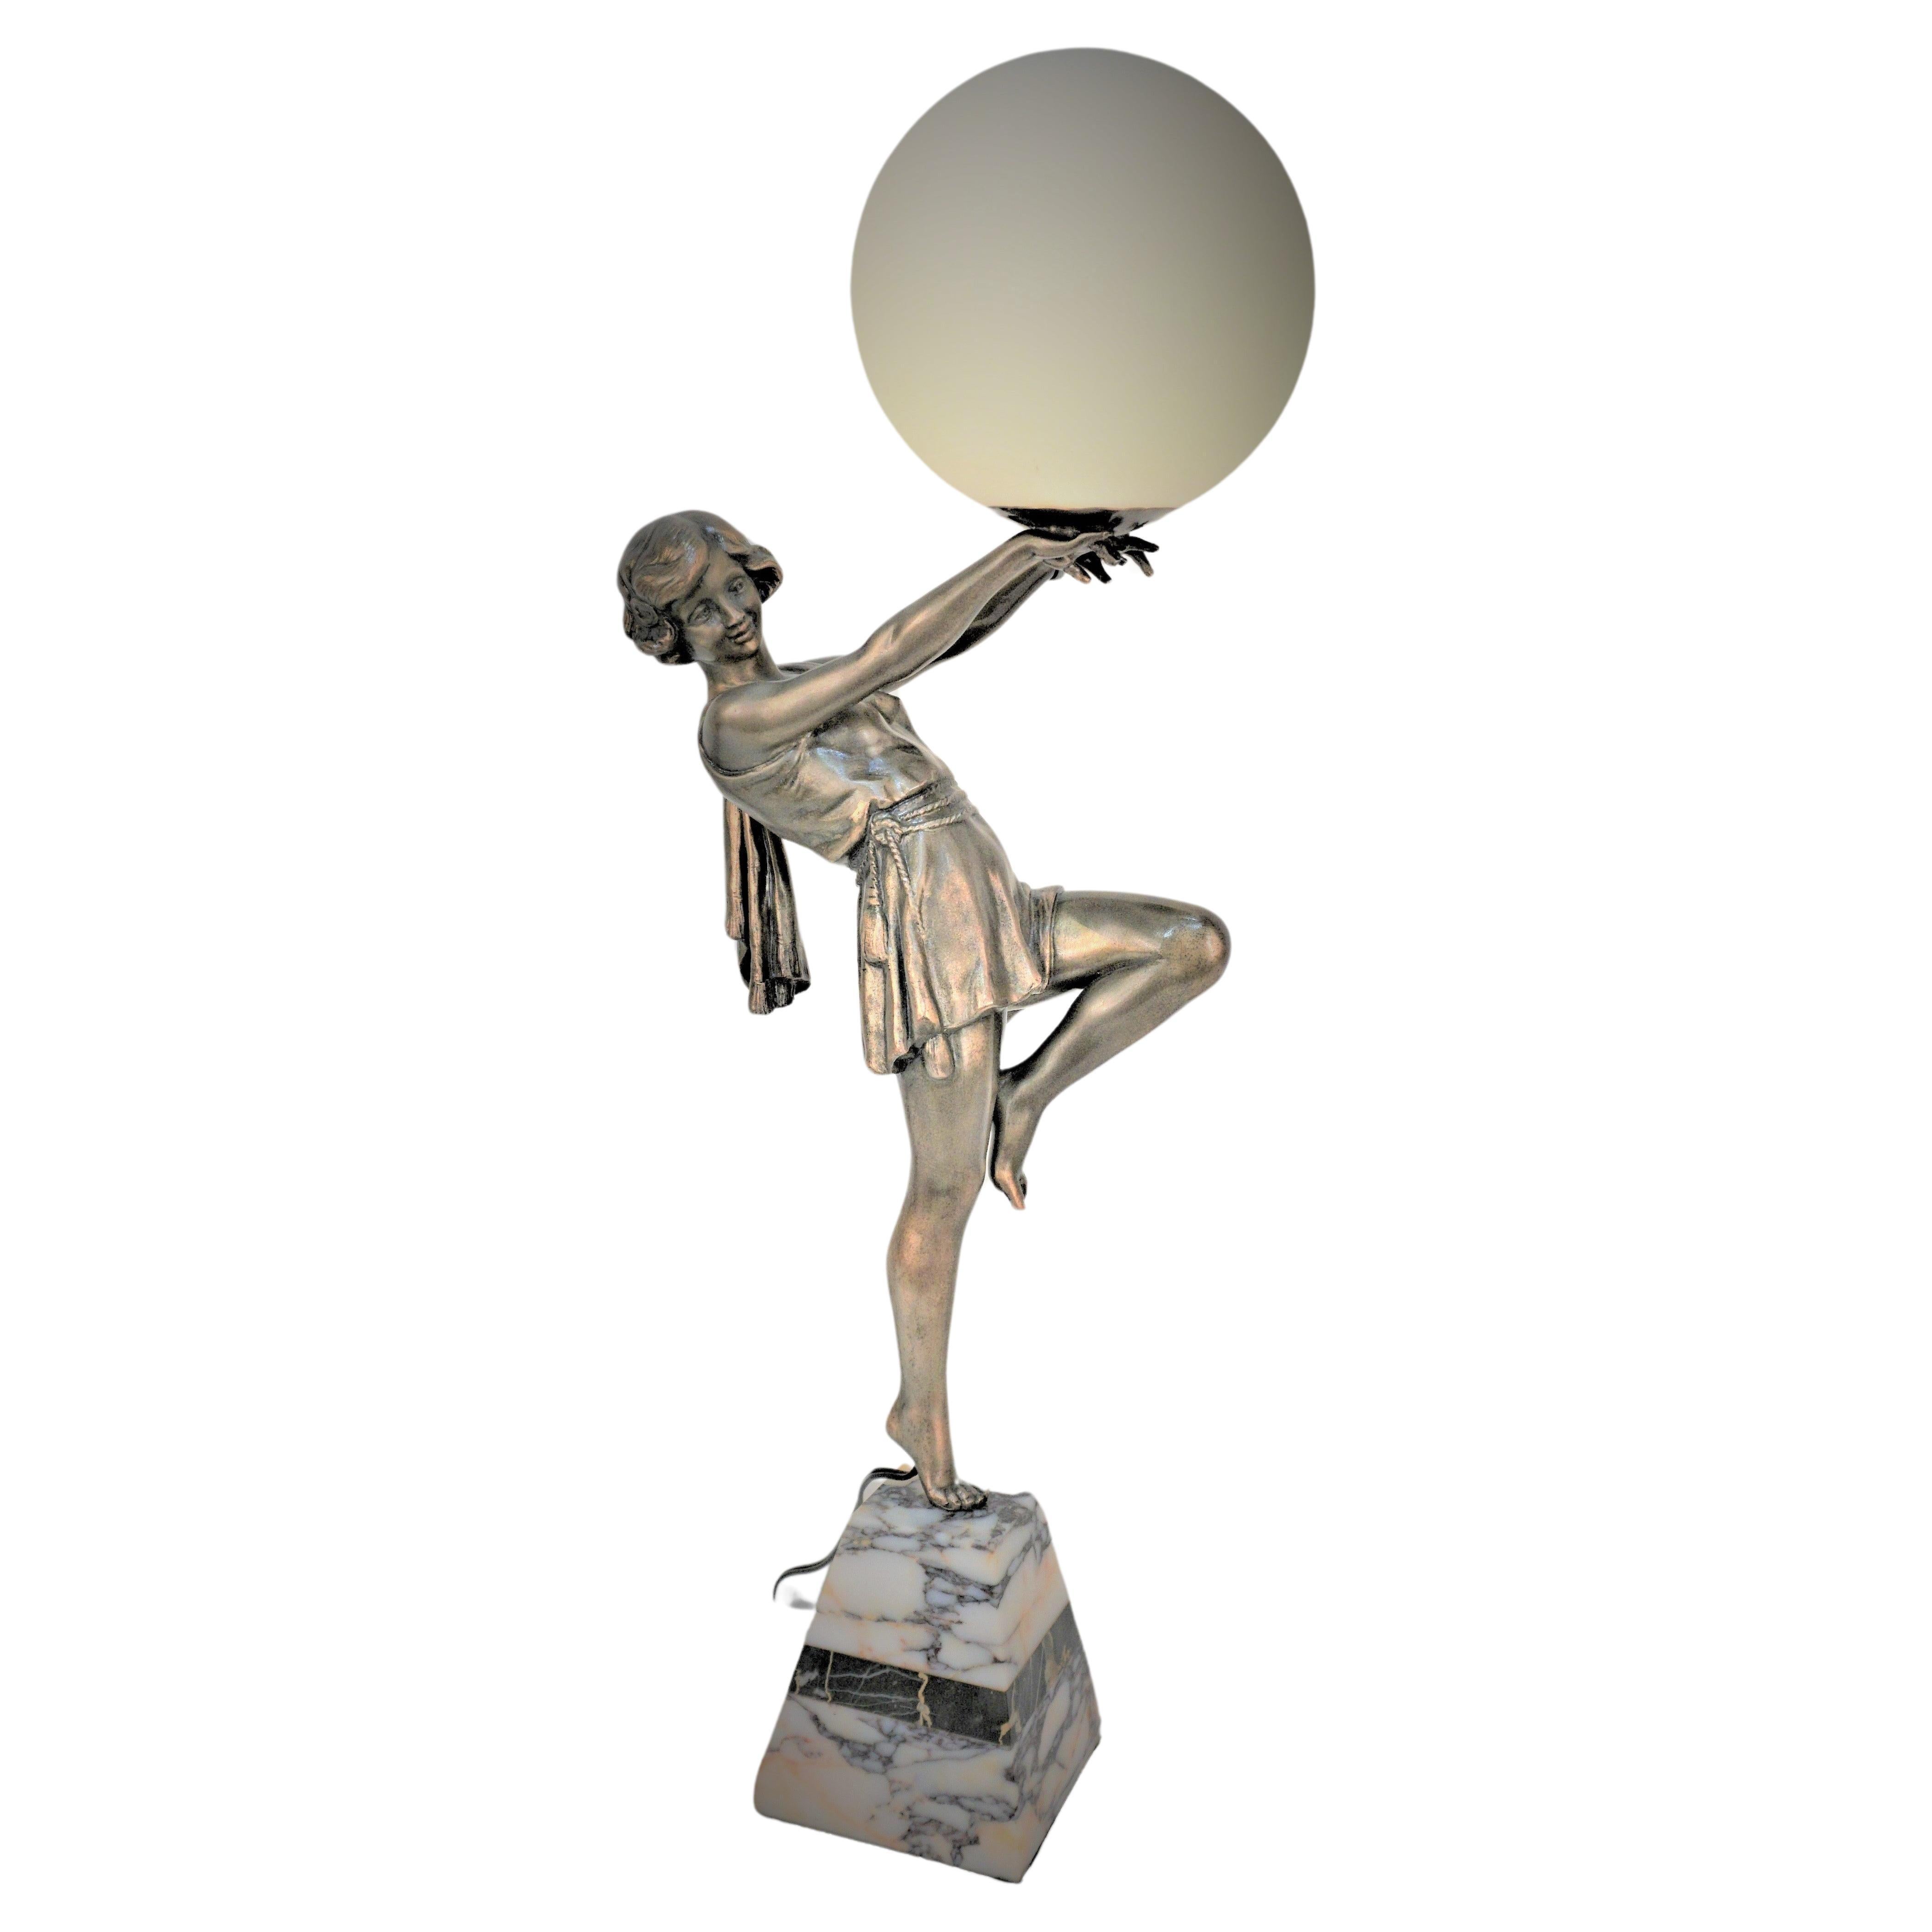  Art Deco figural Holding a Globe Table Lamp by Fabrication Francaise Paris